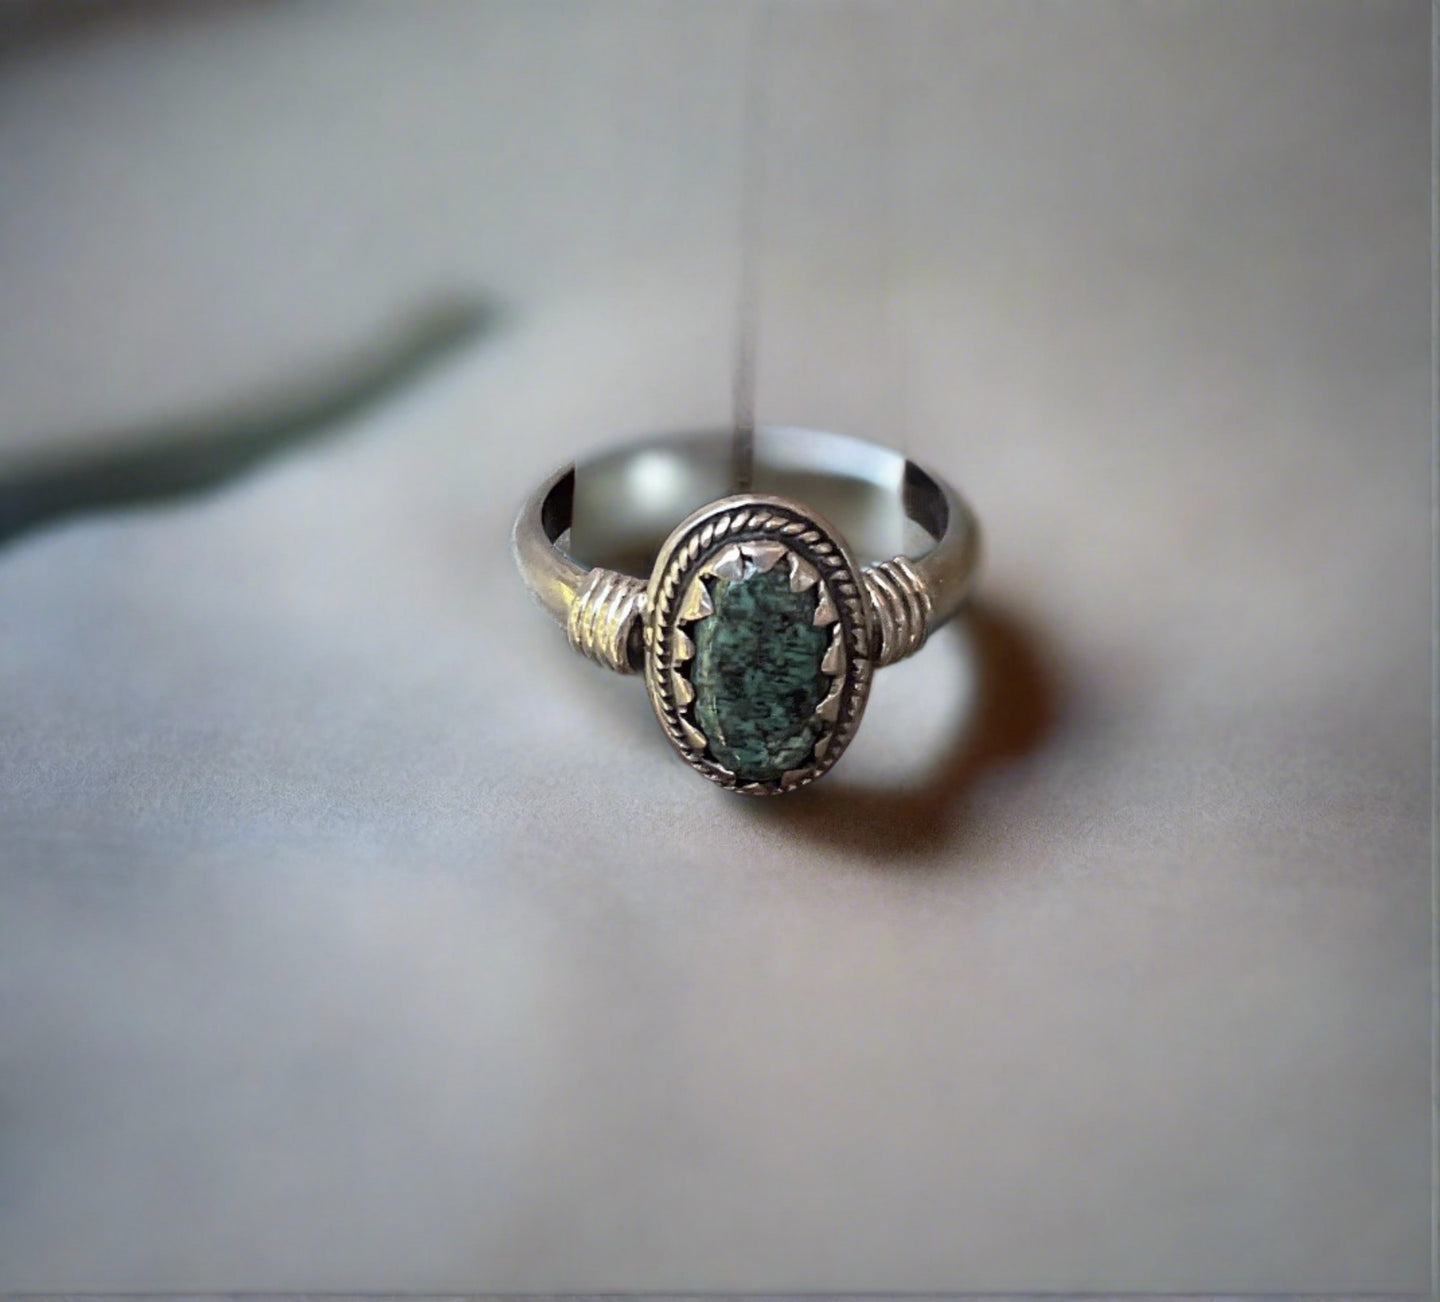 Hand Crafted Native American Green Turquoise Ring In Sterling Silver- Size 8